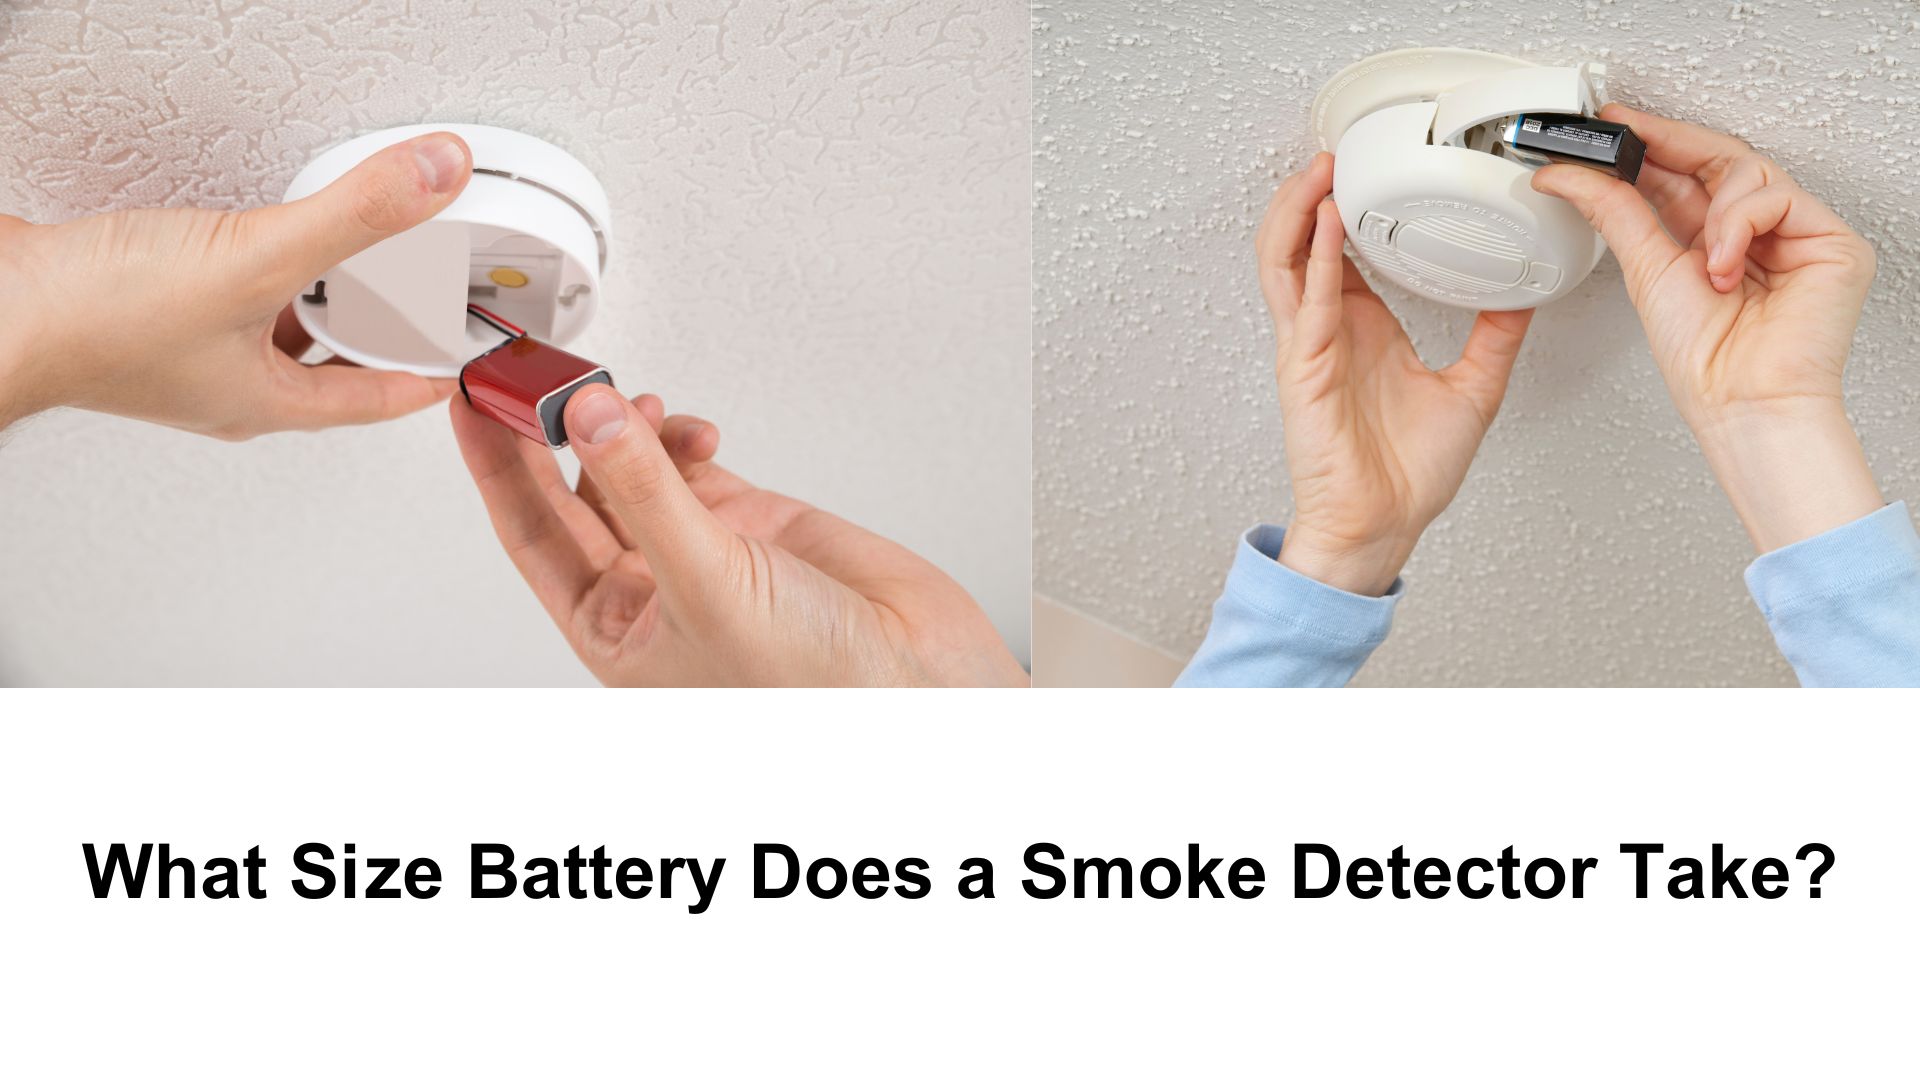 What Size Battery Does a Smoke Detector Take